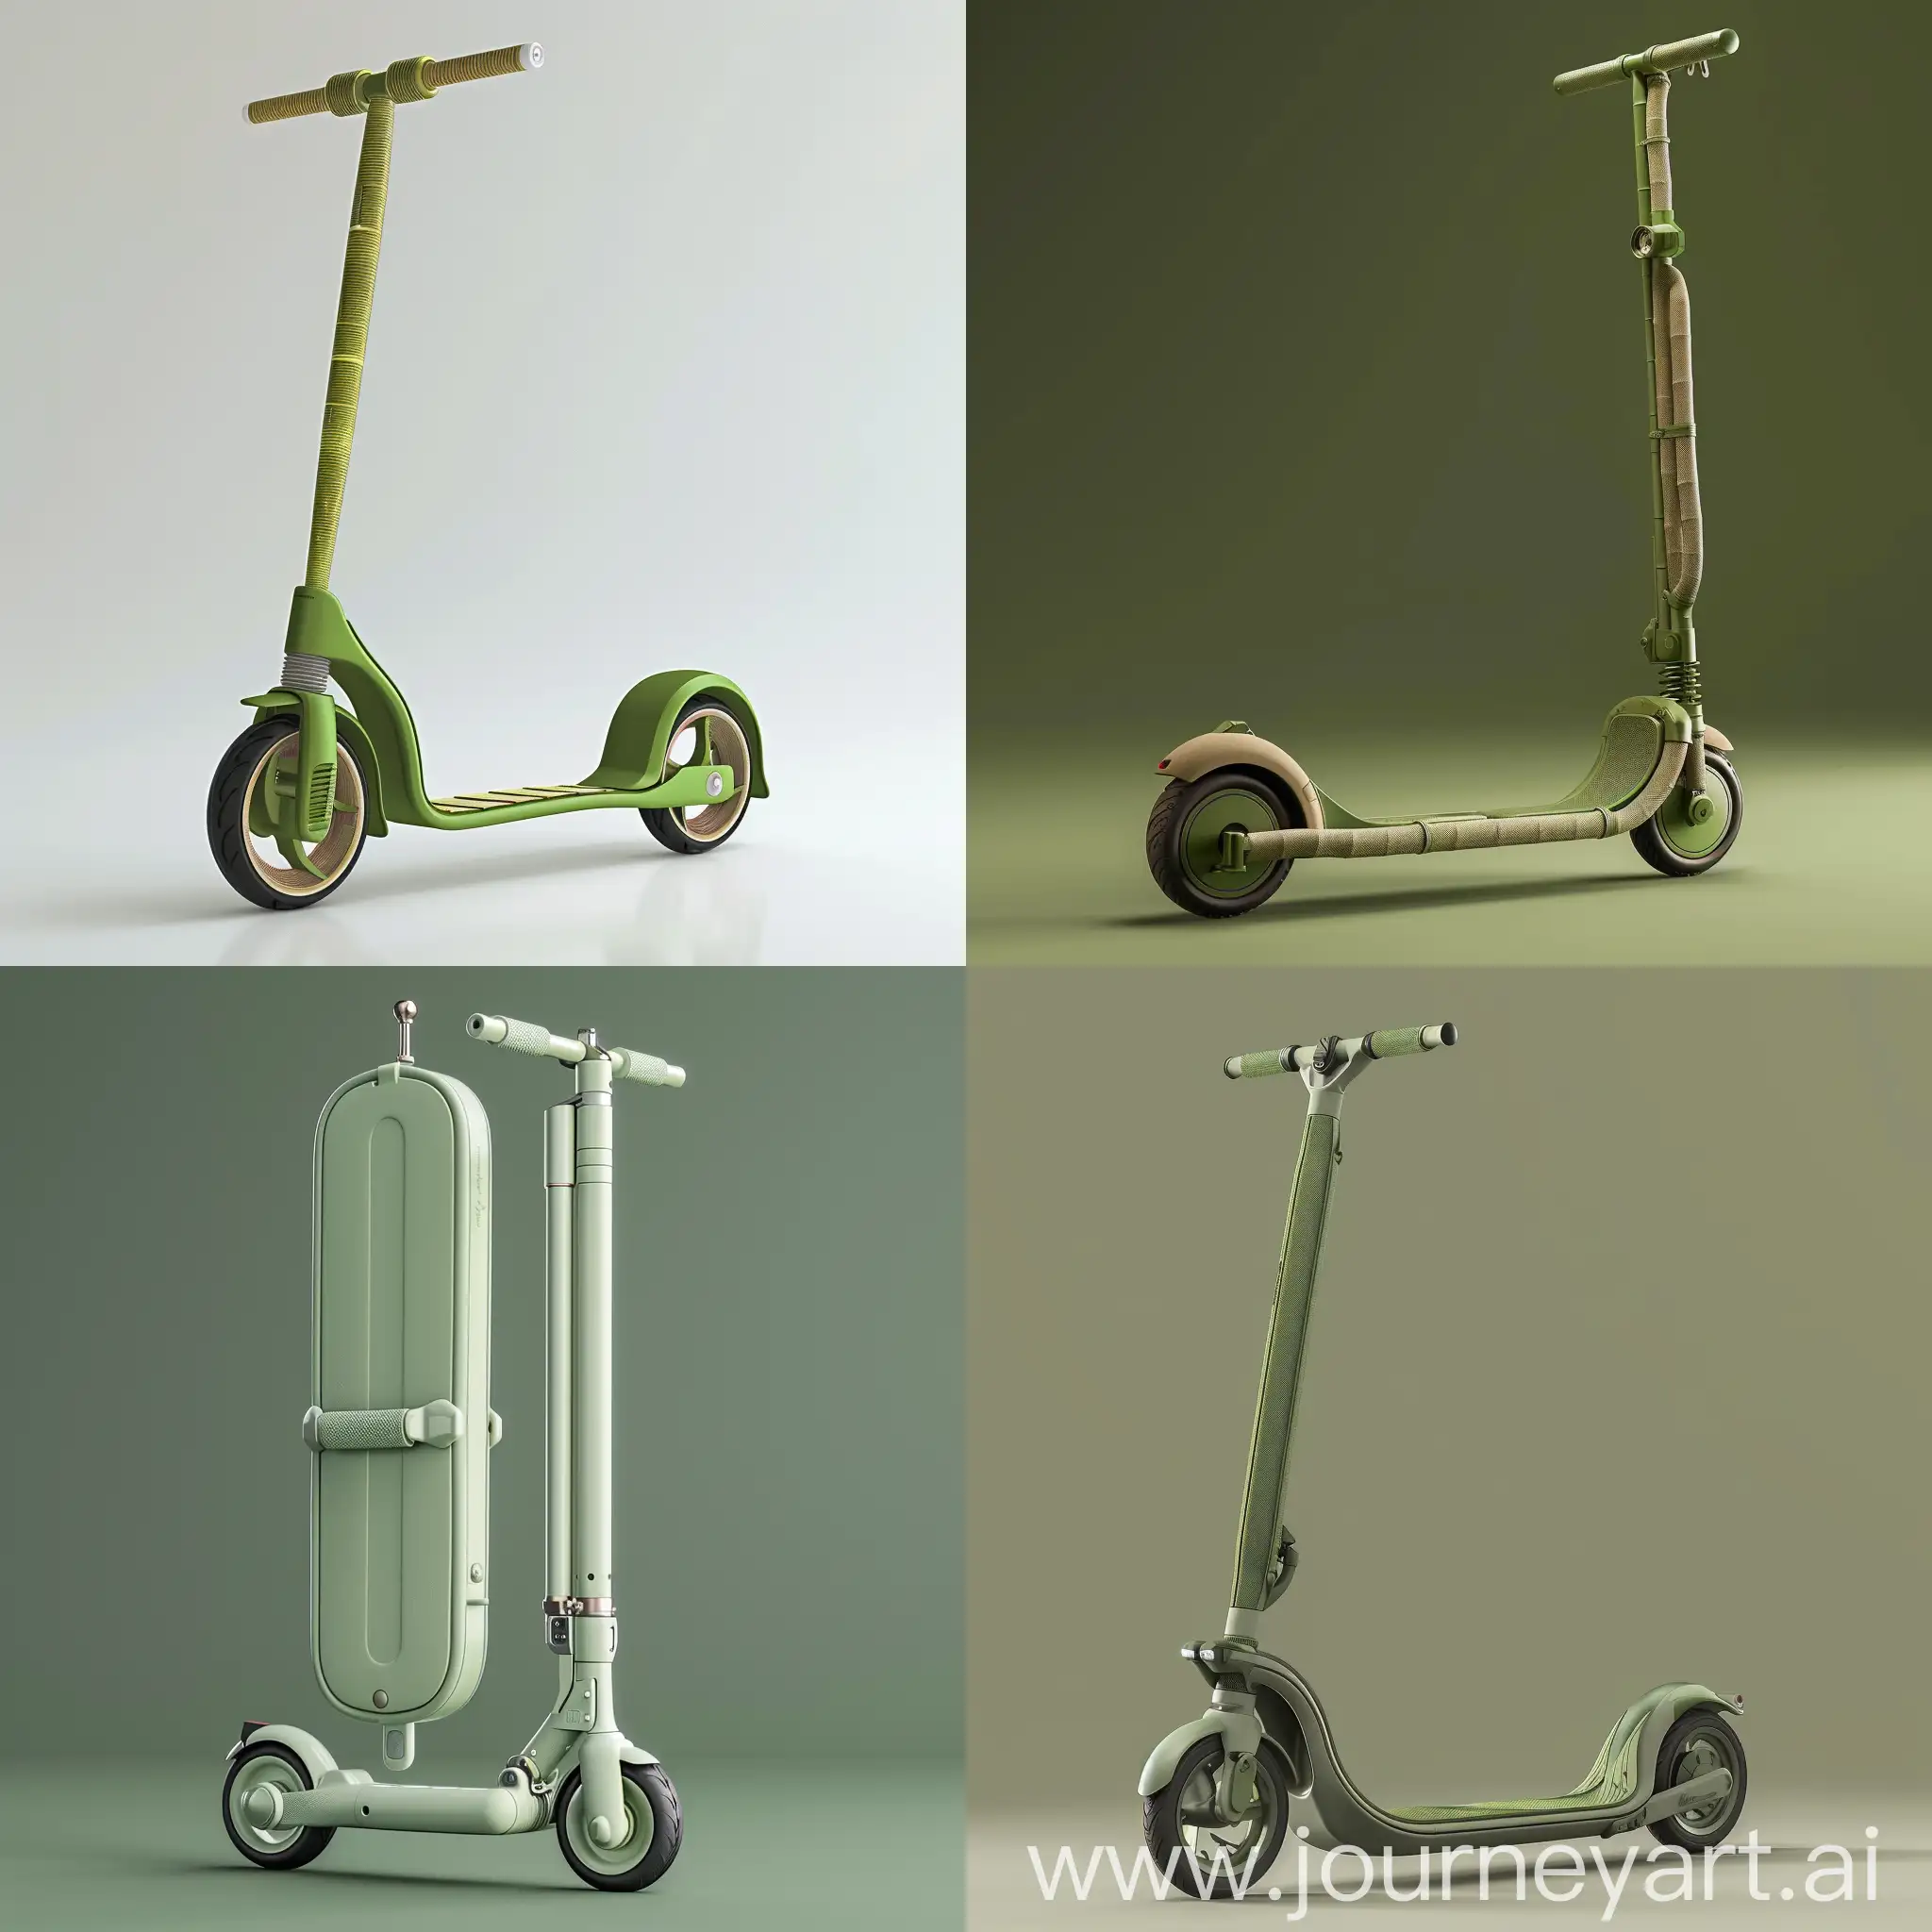 A futuristic, foldable eco-friendly scooter inspired by the characteristics of bamboo. When unfolded, it features a sleek, modern design with gentle curves and a matte green finish. The handle design is minimalistic and curved, inspired by bamboo leaves, made from lightweight aluminum. The footboard is a multi-segmented structure with a textured, non-slip surface, folding neatly into the main body. The scooter folds into a compact cylindrical shape with non-uniform cross-sections mimicking bamboo segments. The wheels are retractable, folding into the body to create a smooth, unified form. The scooter is made of sustainable materials including recycled aluminum and eco-friendly composites. LED lights are integrated into the front and rear for visibility. It features spring-loaded locking mechanisms for the handles and footboard, and a carrying strap for easy transport. The design emphasizes both form and function, suitable for urban commuting, highlighting eco-friendliness and innovation.